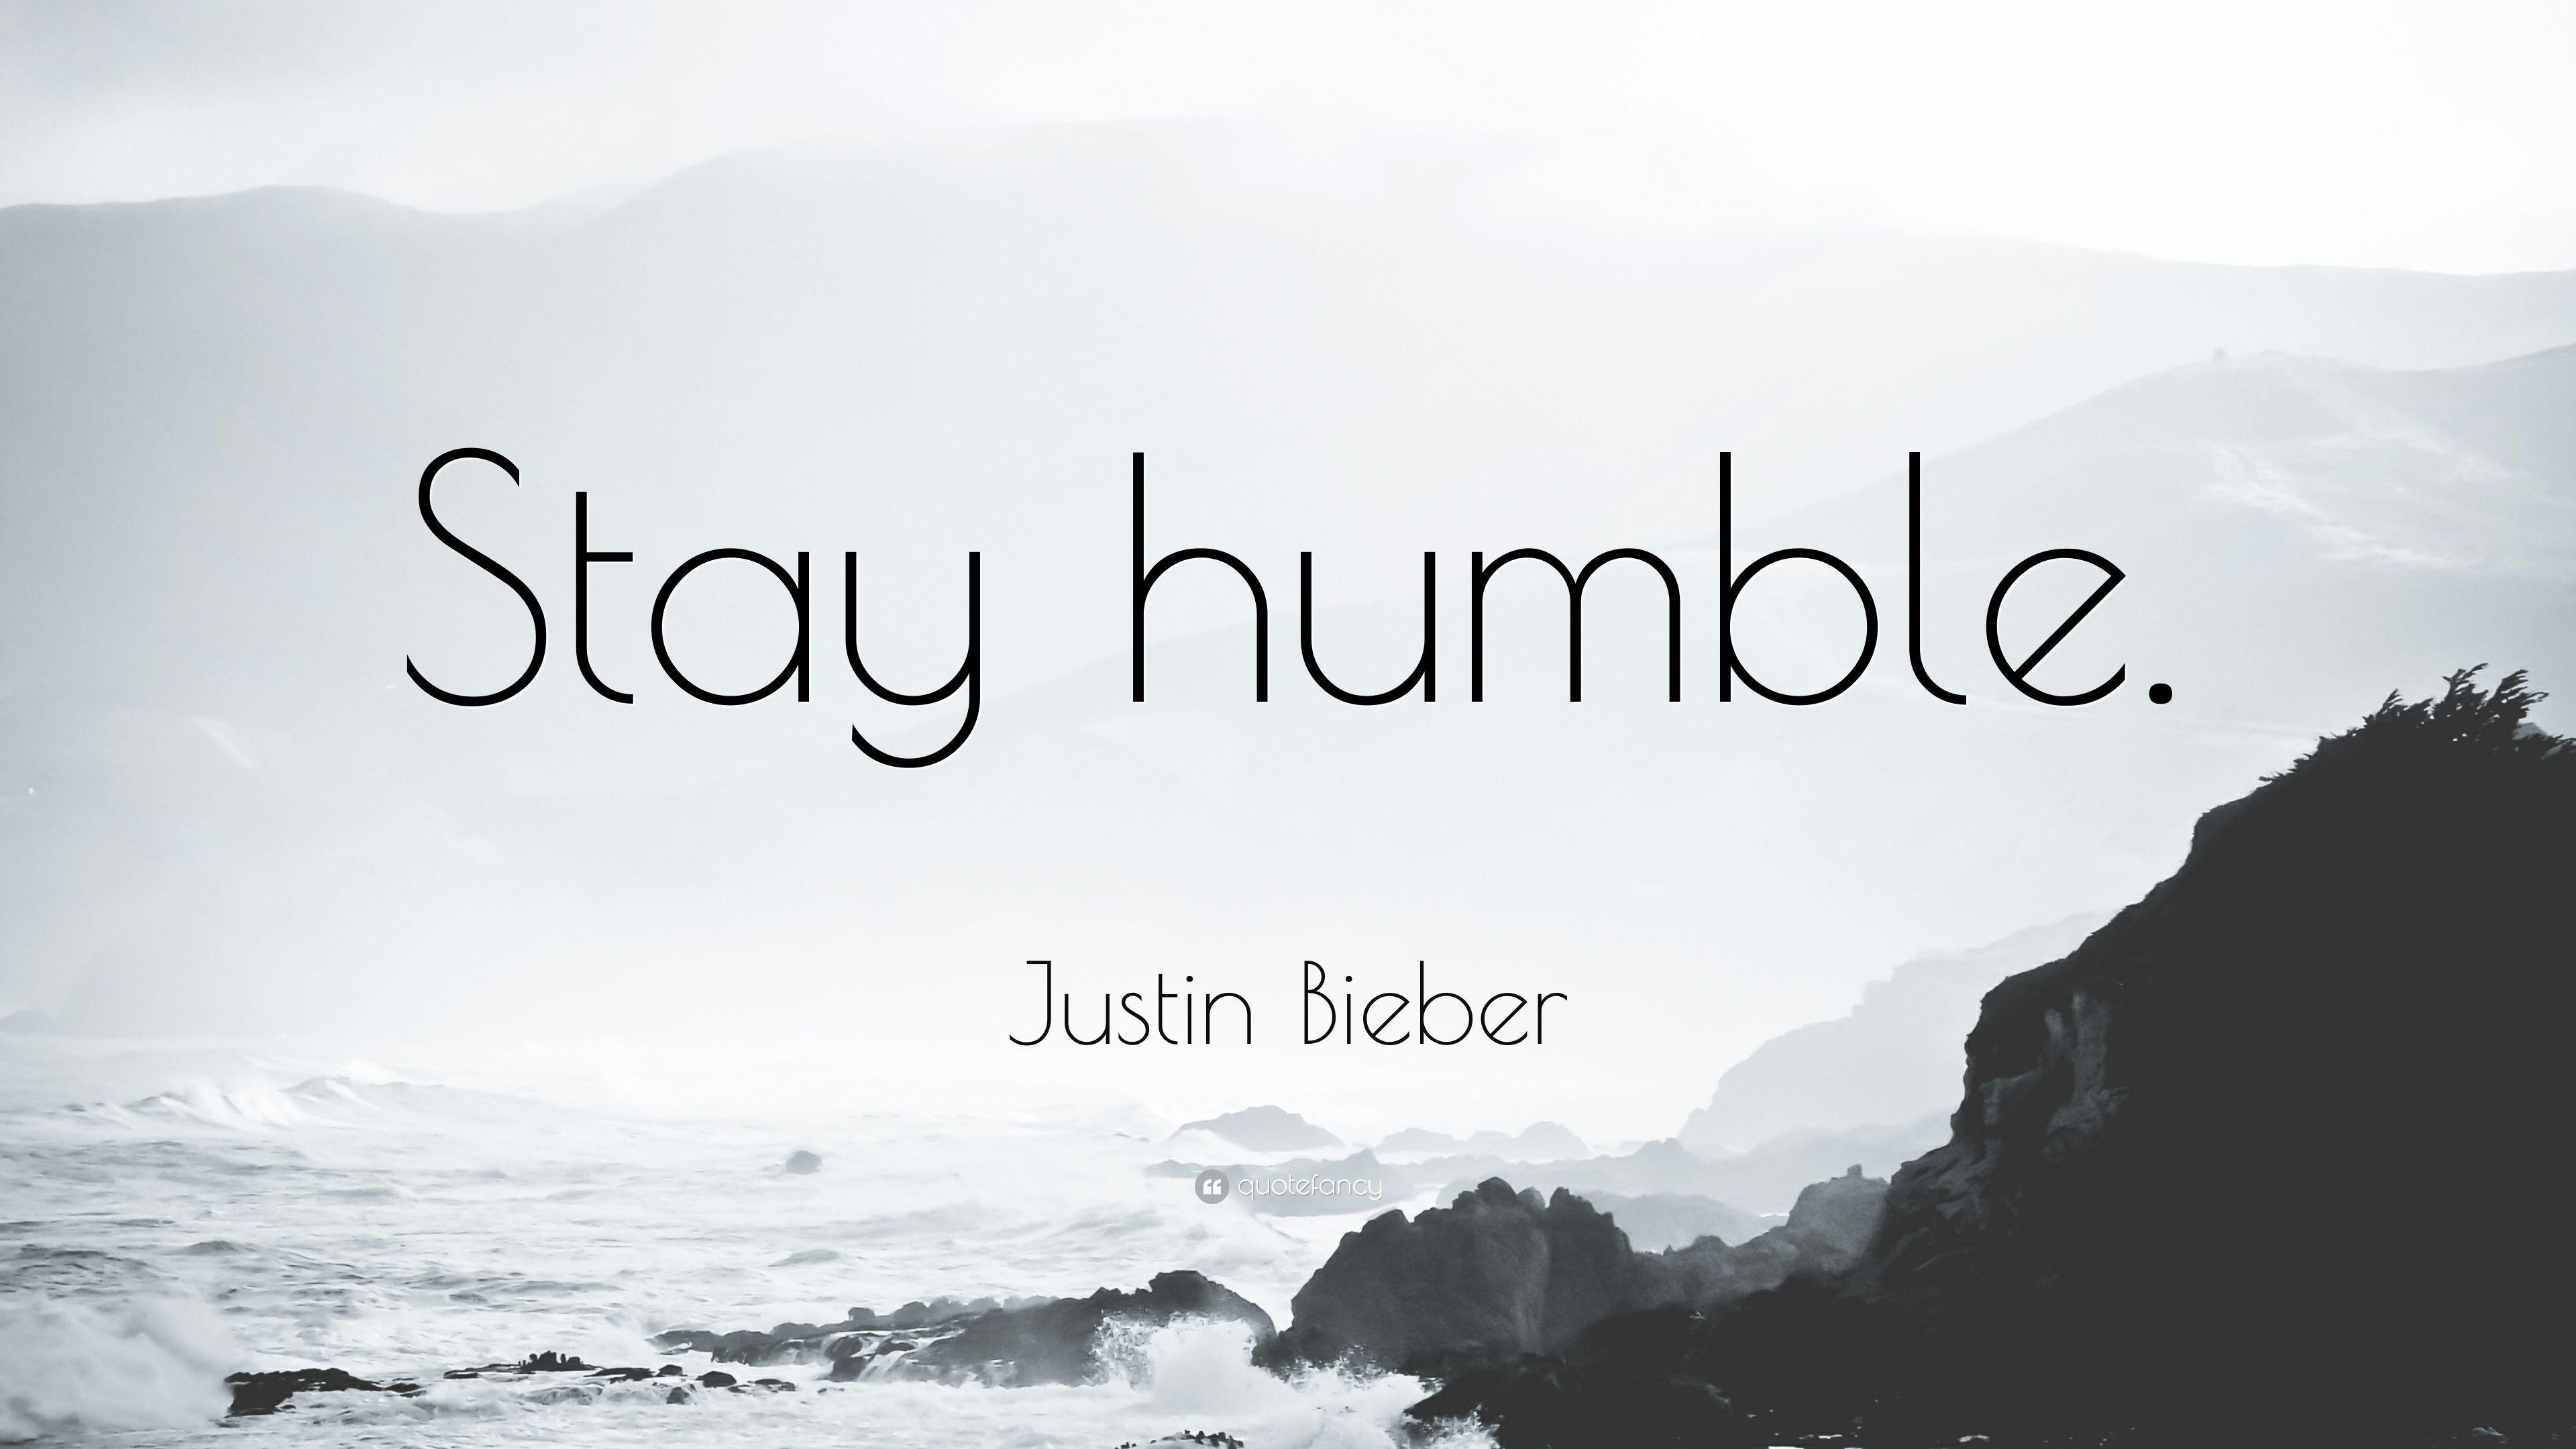 Justin Bieber Quote: “Stay humble.” (10 wallpaper)